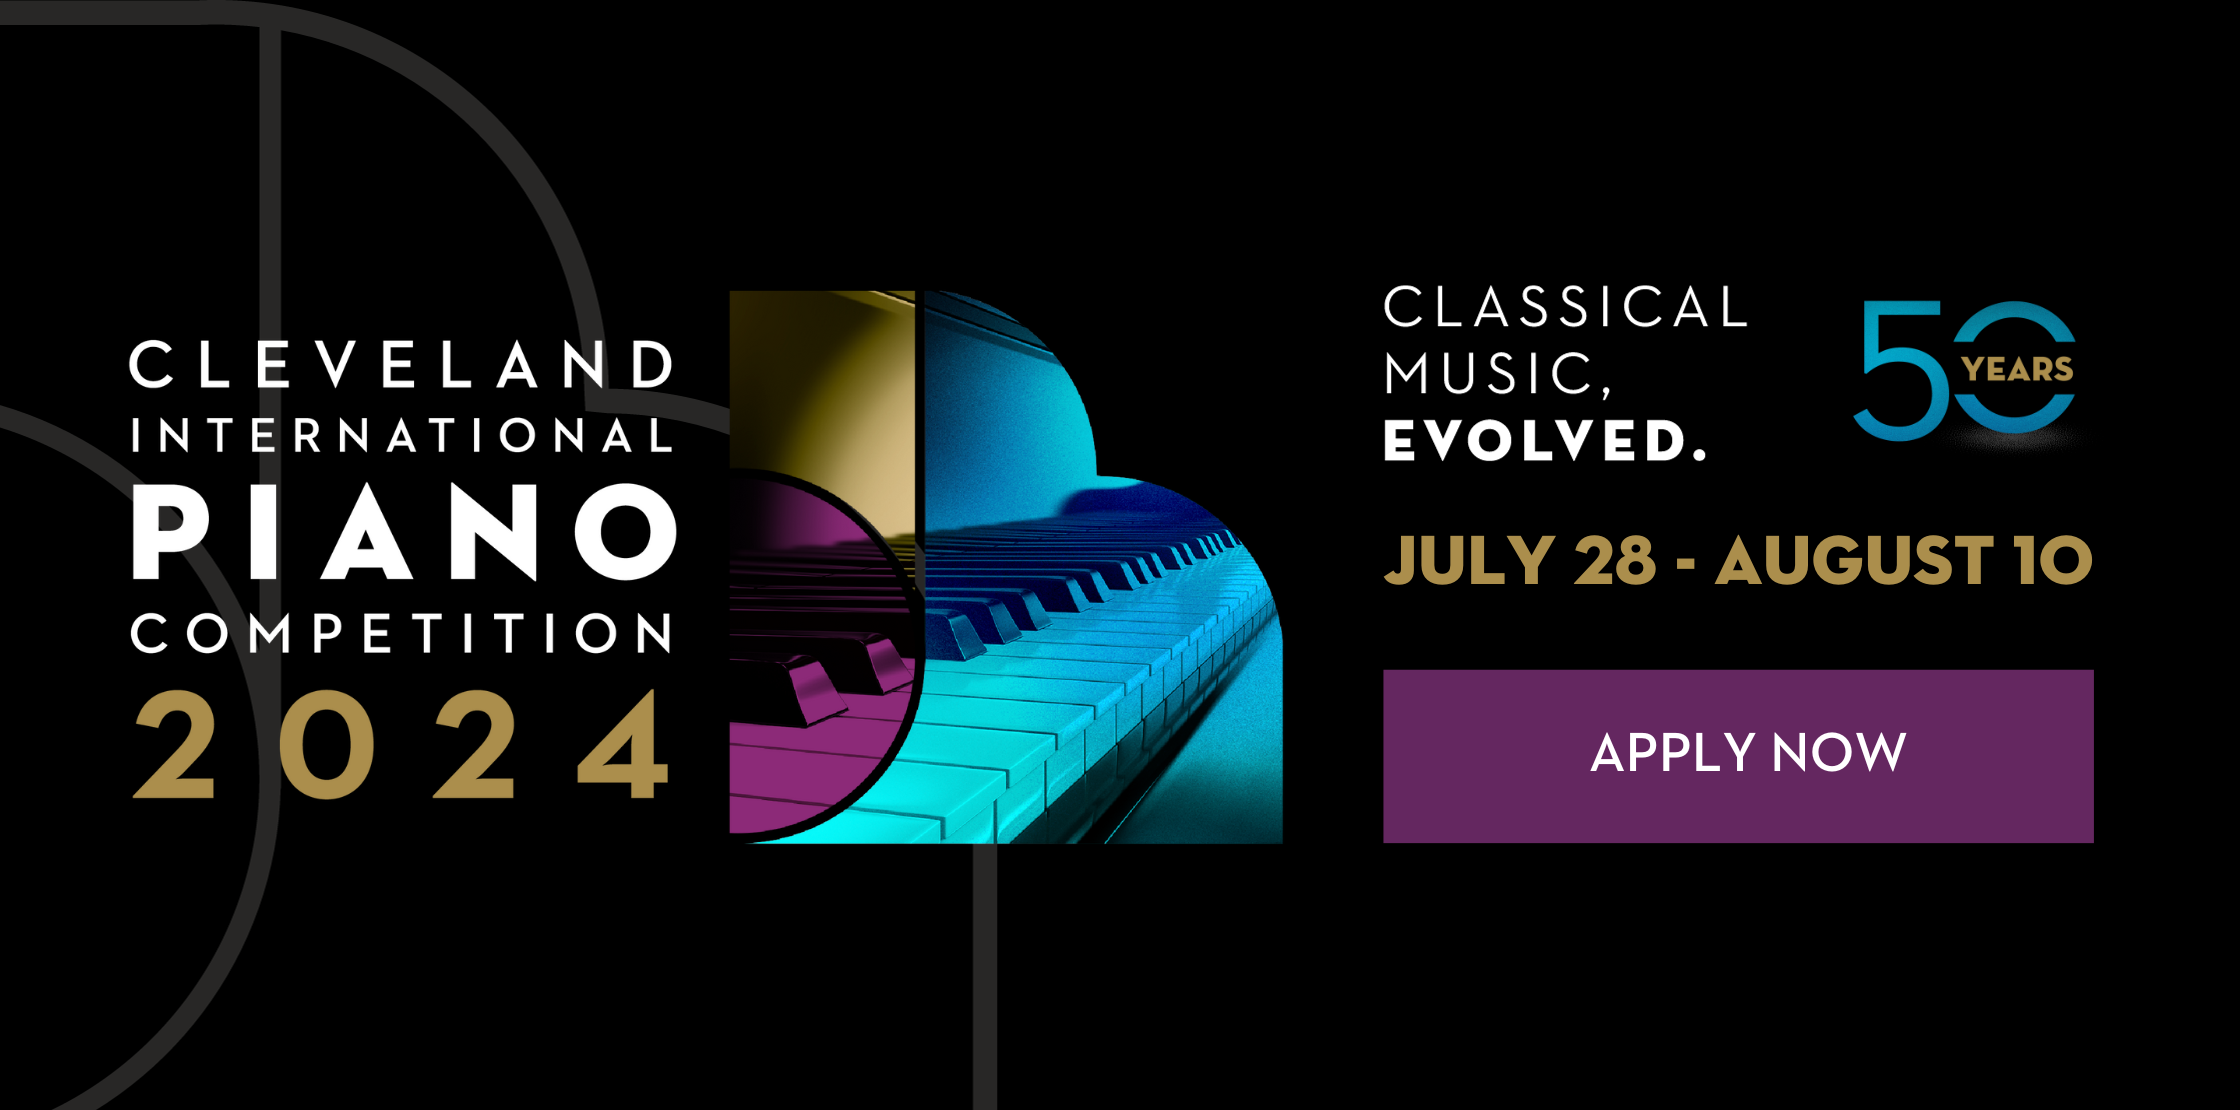 Cleveland International Piano Competition 2024. Classical Music, Evolved. July 28 - August 10